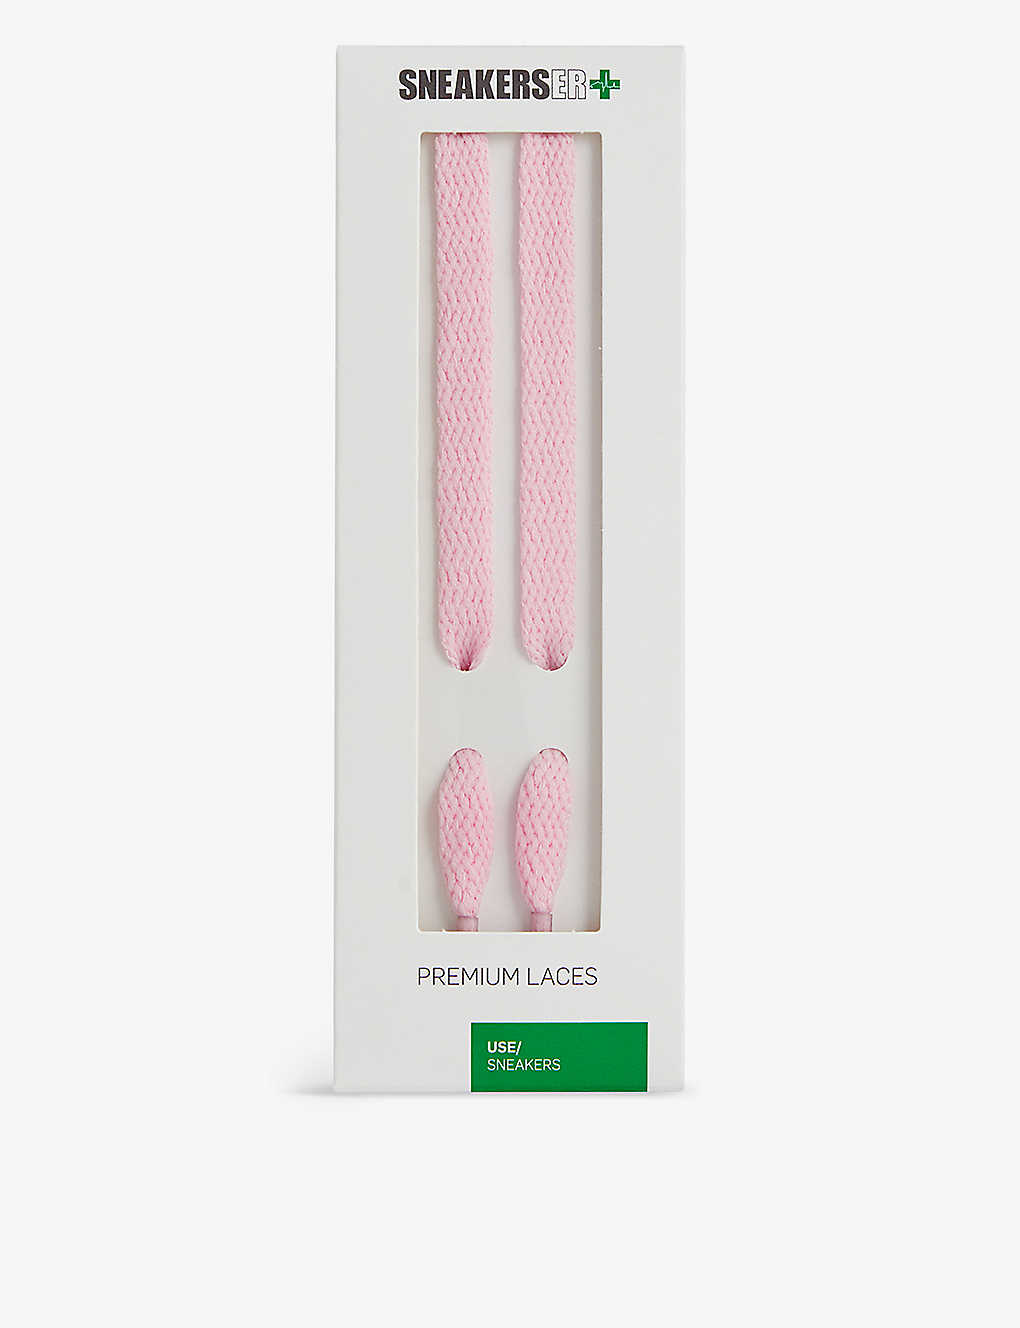 Sneakers Er Mens Baby Pink Flat Woven Laces 180cm